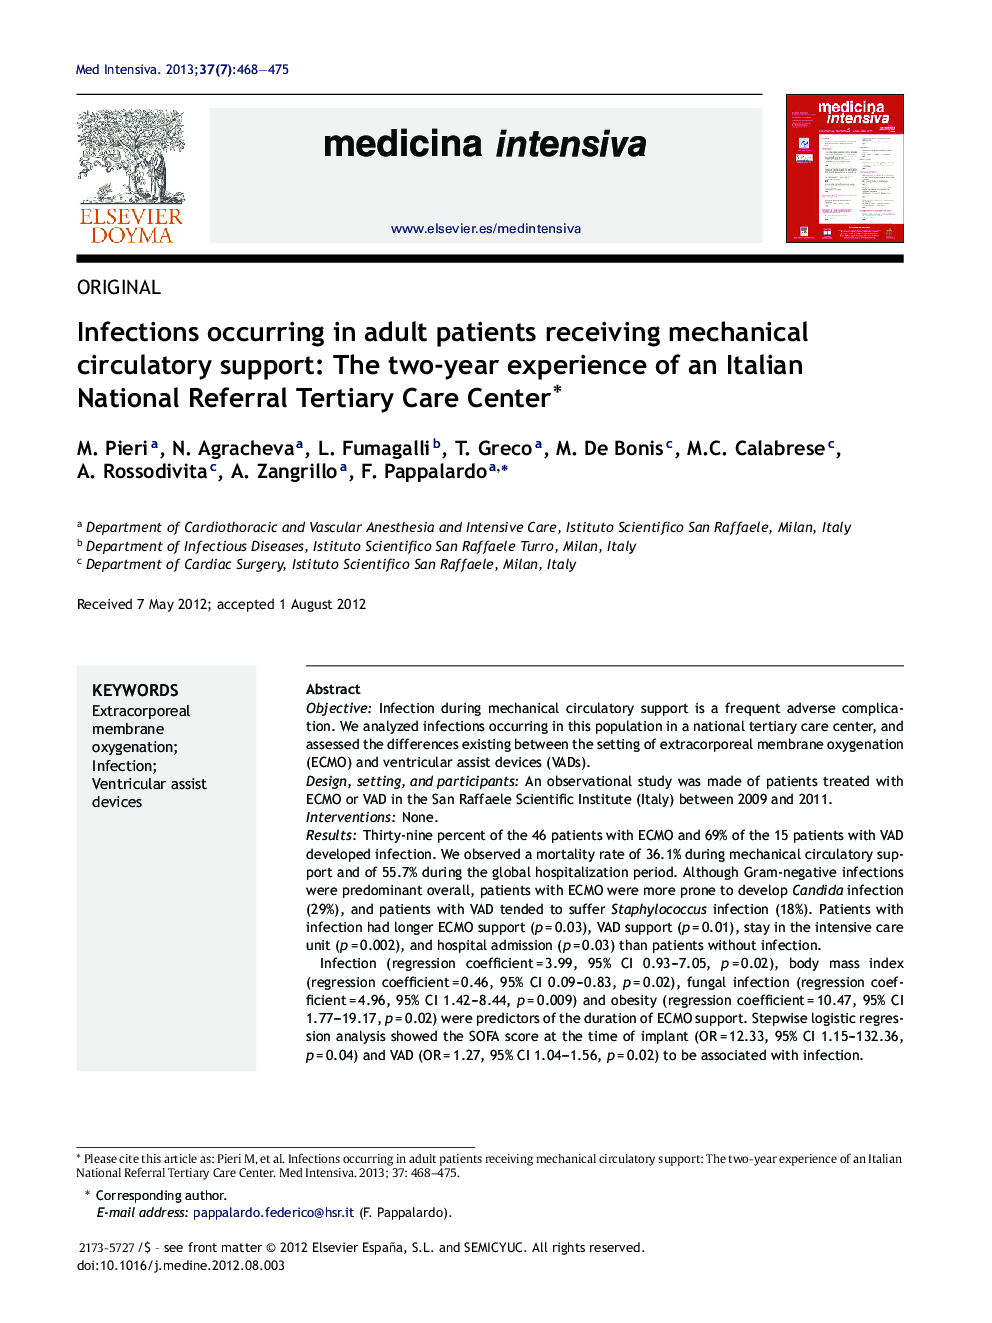 Infections occurring in adult patients receiving mechanical circulatory support: The two-year experience of an Italian National Referral Tertiary Care Center